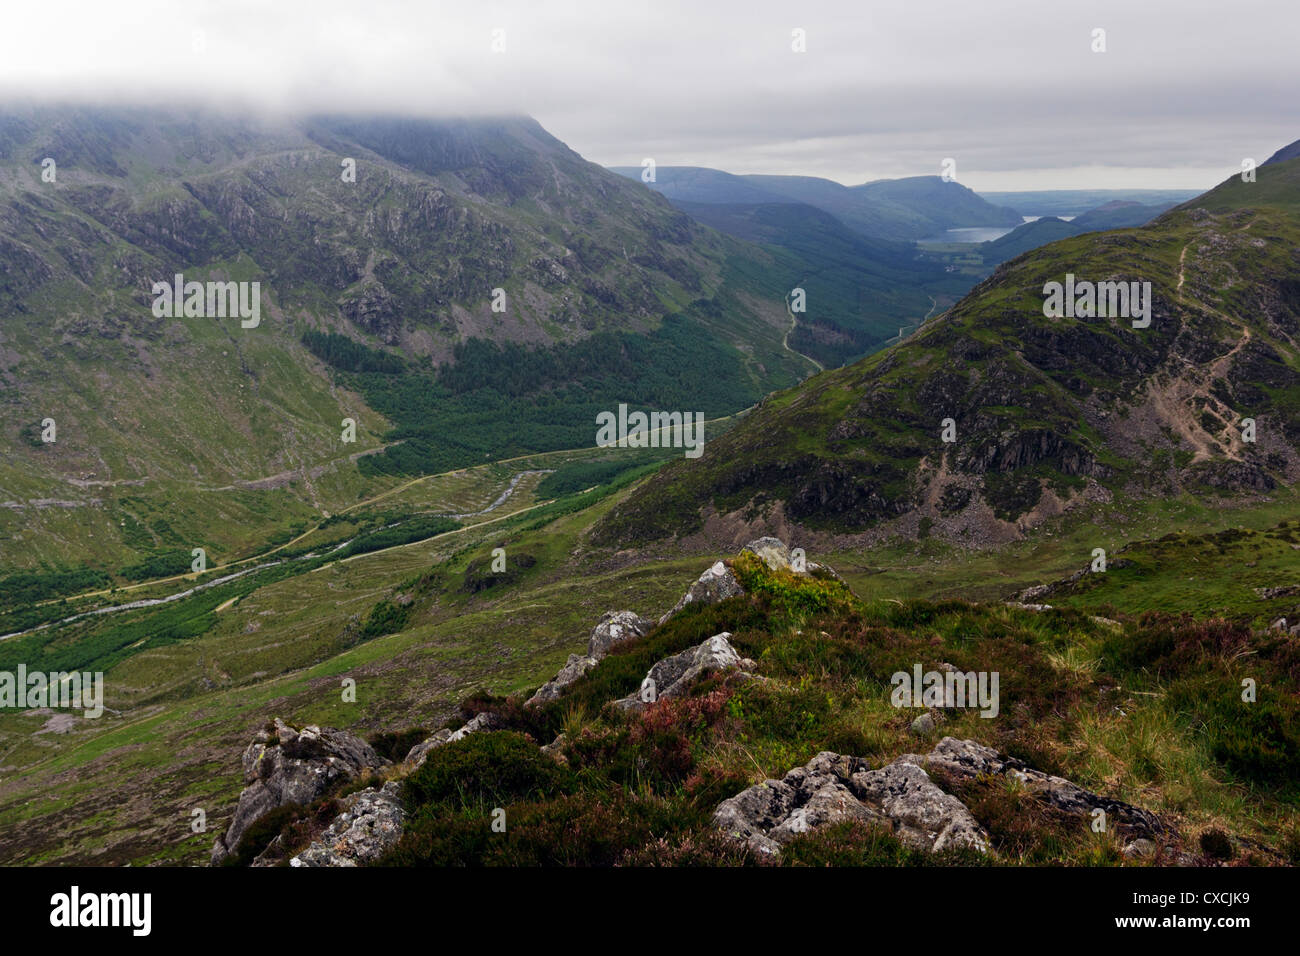 Looking out over Pillar and Ennerdale from the summit of Haystacks in the Lake District National Park, Cumbria. Stock Photo